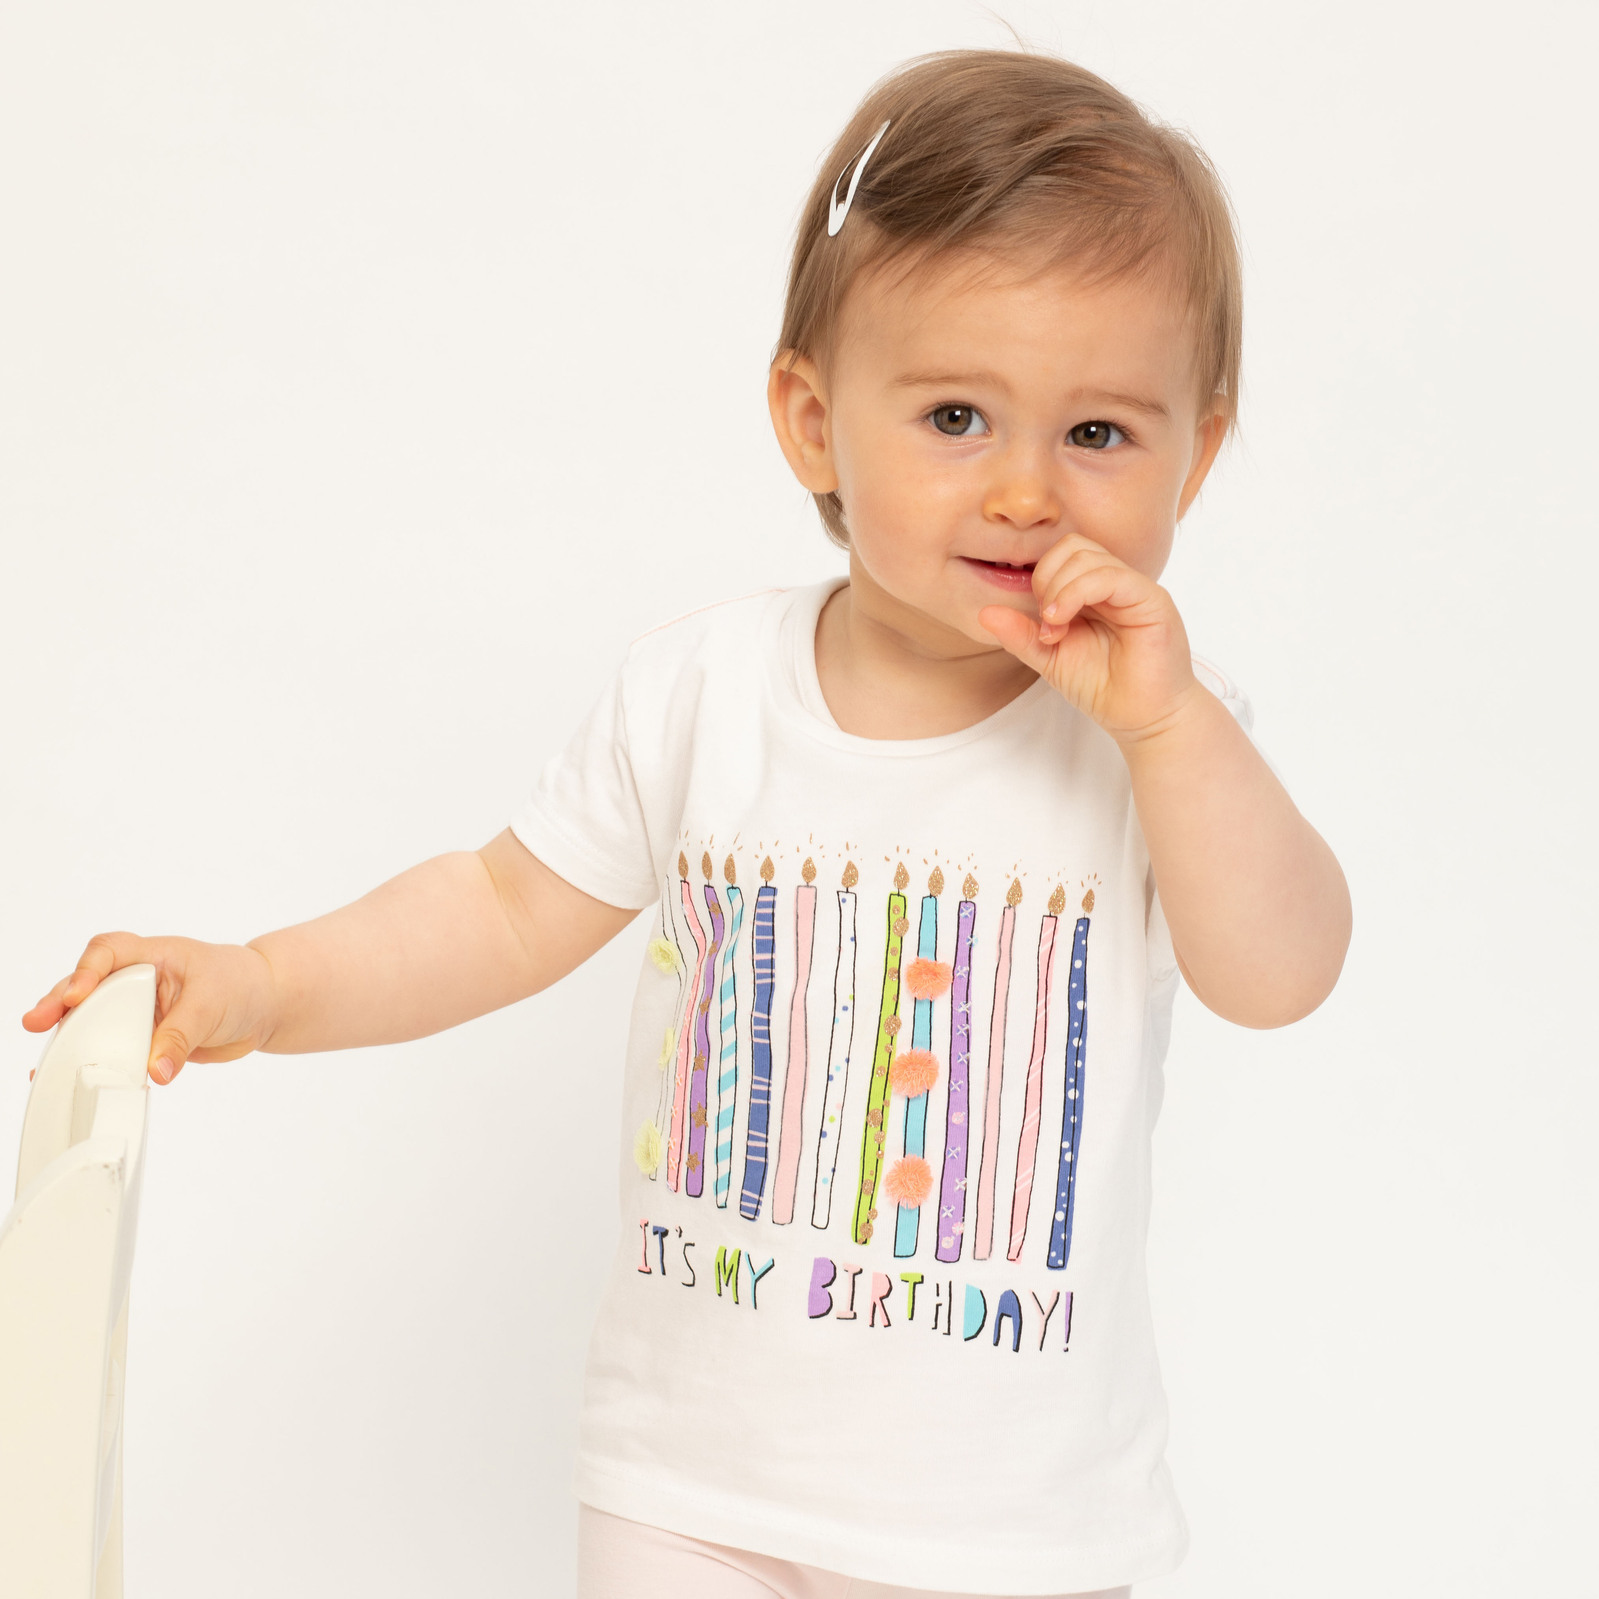 Childs first birthday portrait in professional family photography studio in Dublin 